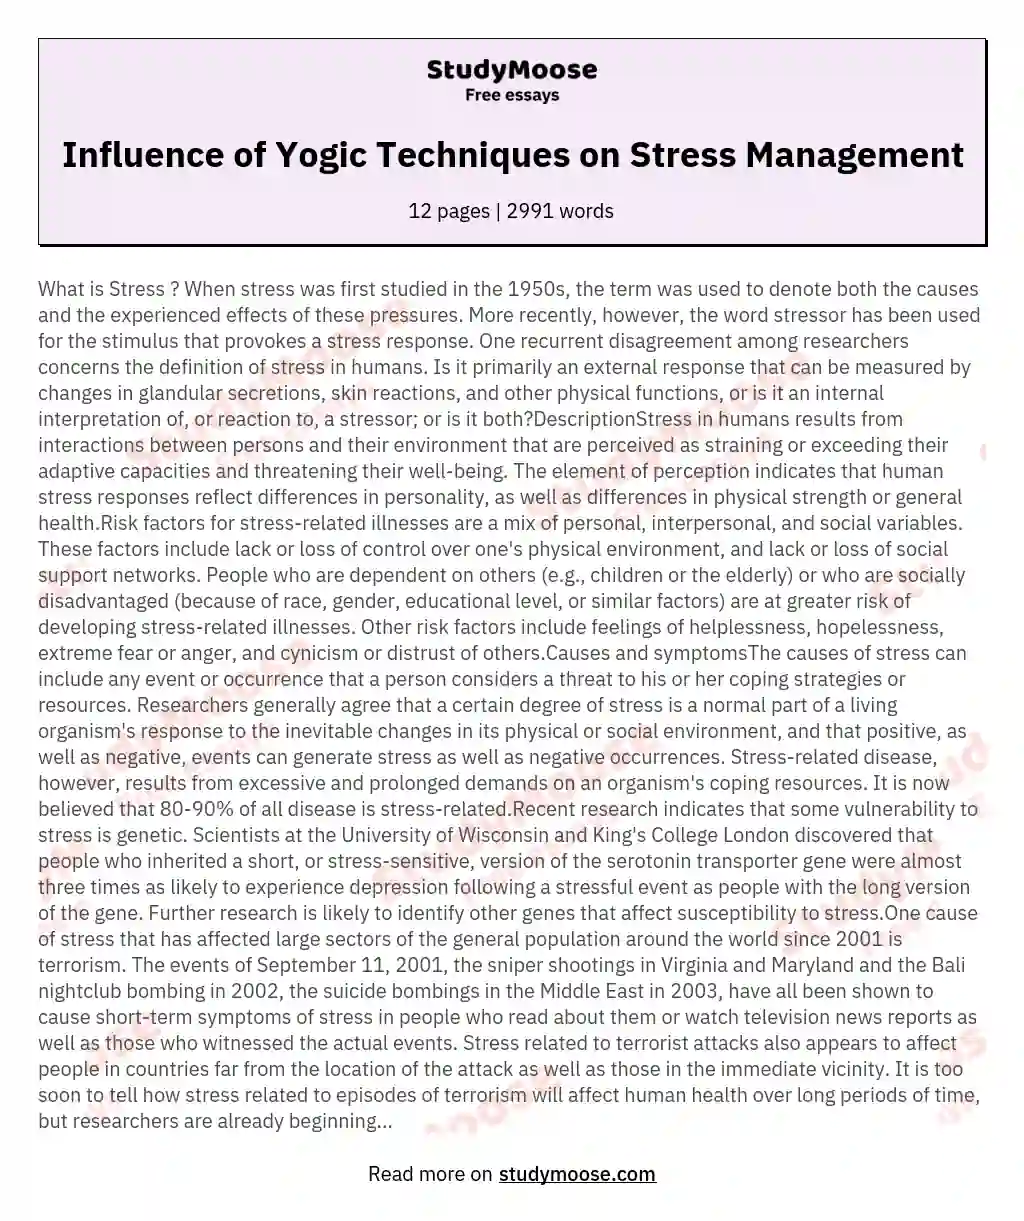 Influence of Yogic Techniques on Stress Management essay